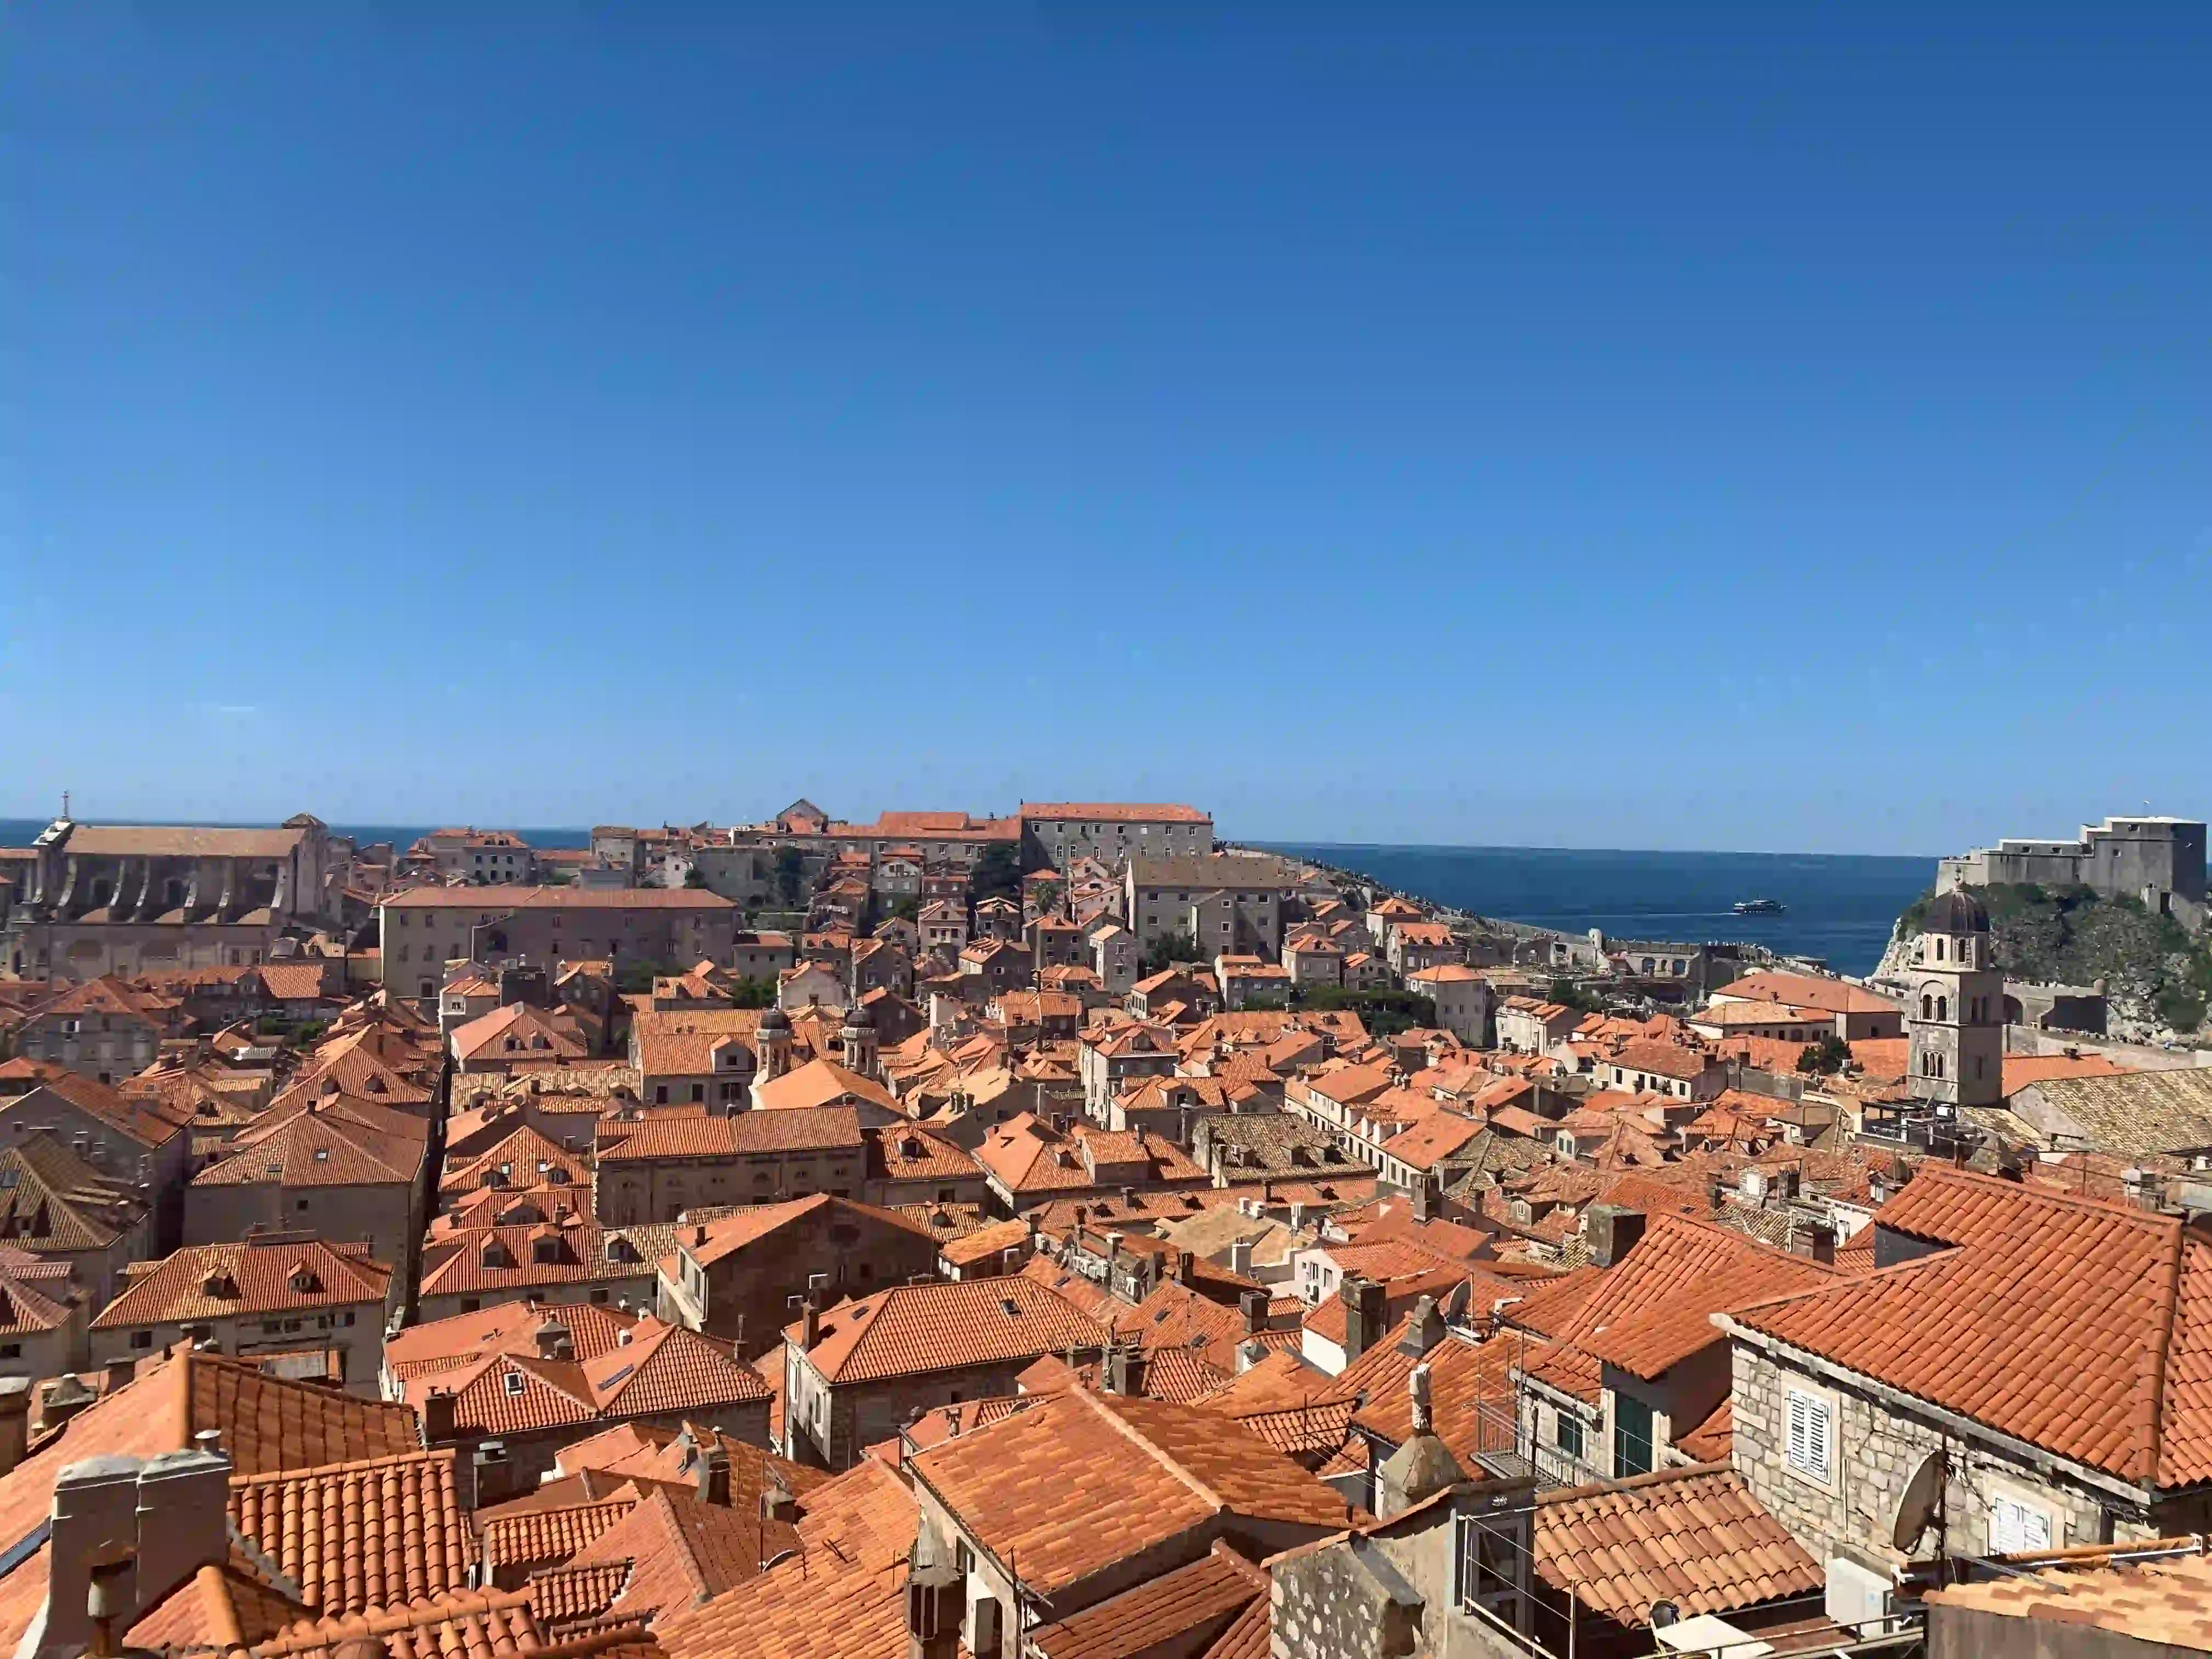 A view from the city walls in Dubrovnik, Croatia